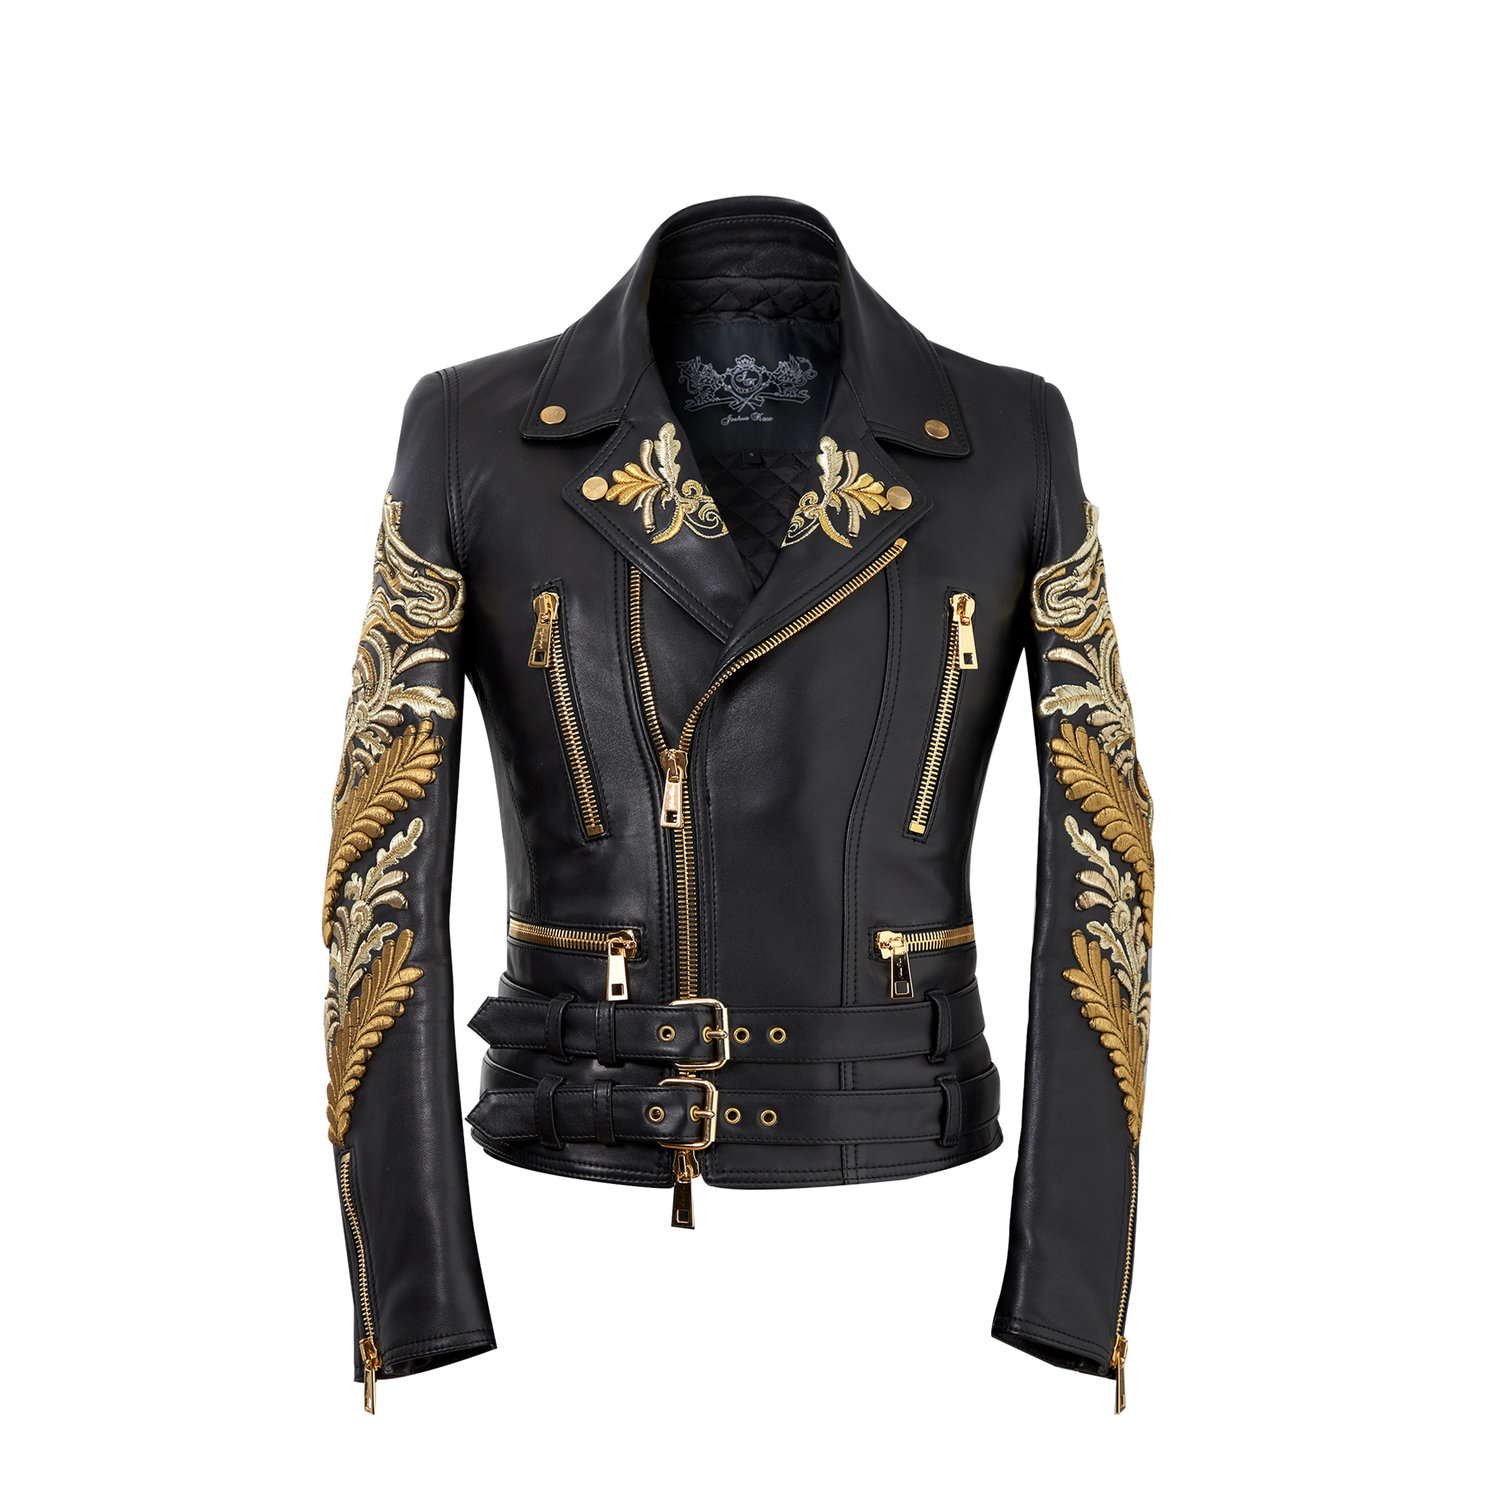 The Gold Embroidered Biker Jacket with Gold Trim — Joshua fashion, tailoring, bespoke, suit, tailor, fashion, runway